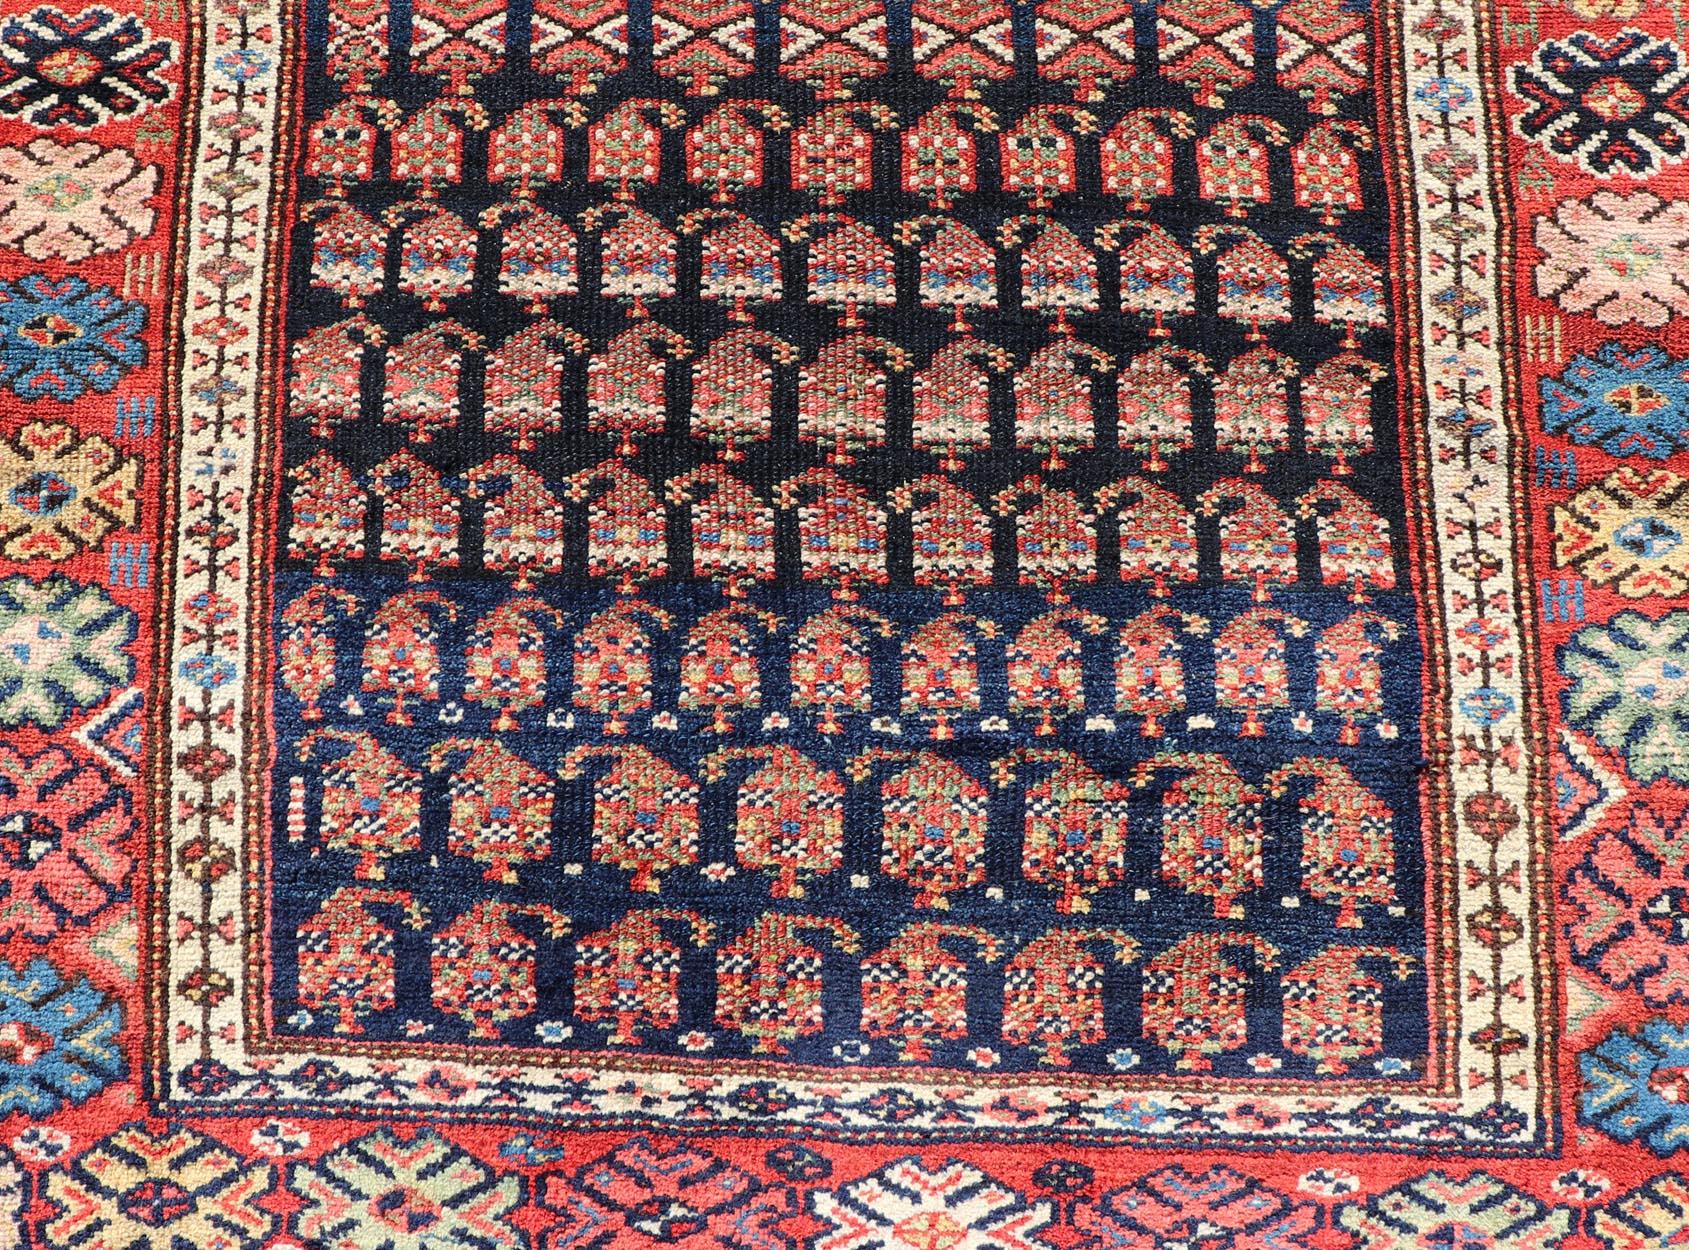 Measures: 3'10 x 9'4 
Antique Kurdish Gallery Runner In All-Over Geometric Design on a Blue Background. Country of Origin: Iran; Type: Kurdish; Design: Tribal, Floral, Tribal Motif; Keivan Woven Arts: Rug EMB-22154-15074. 

This antique gallery